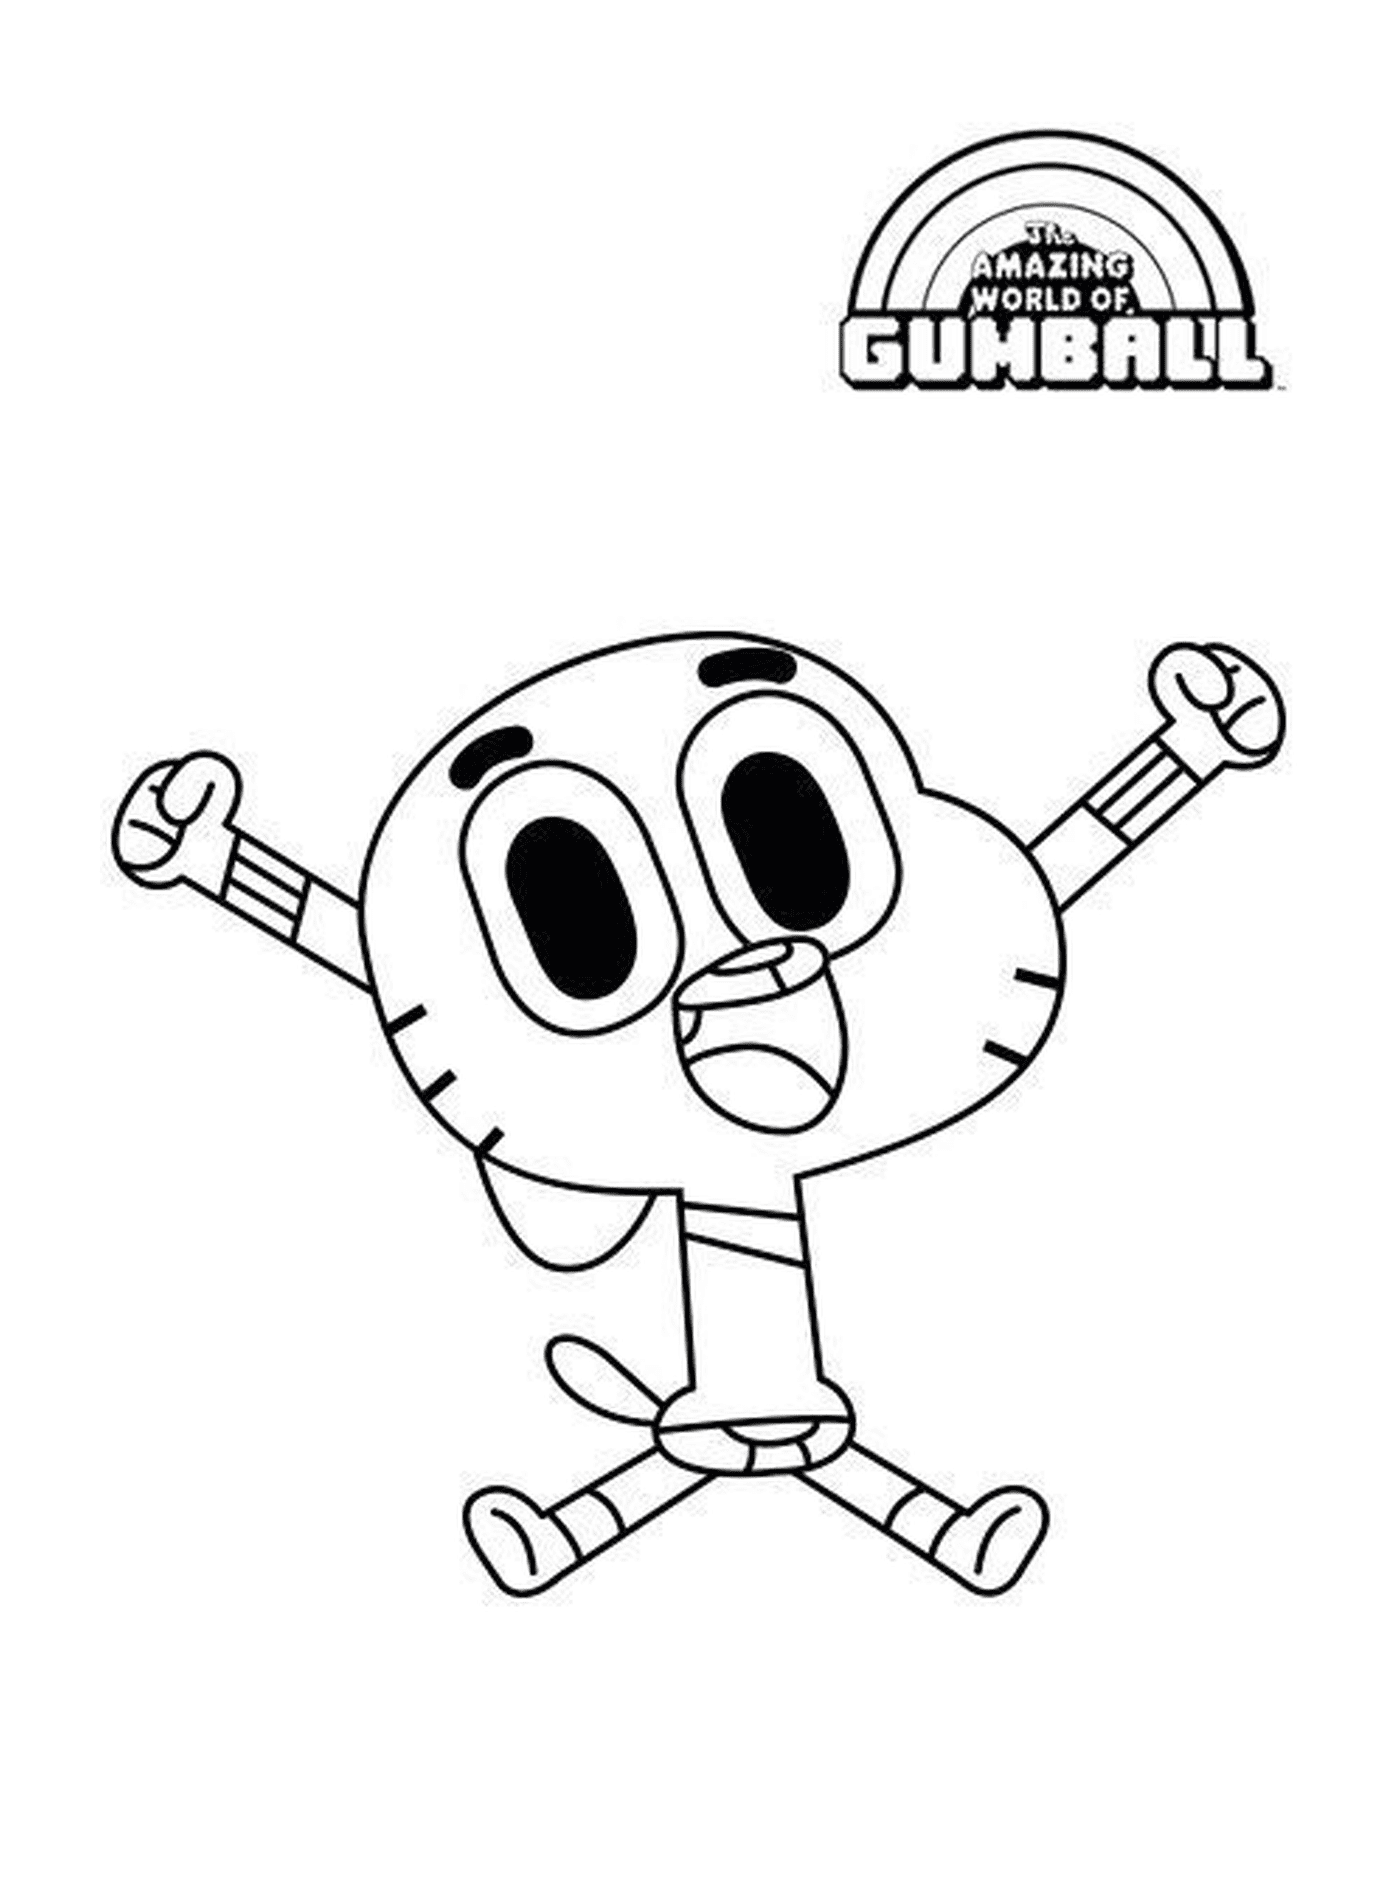  Gumball, the endearing character 